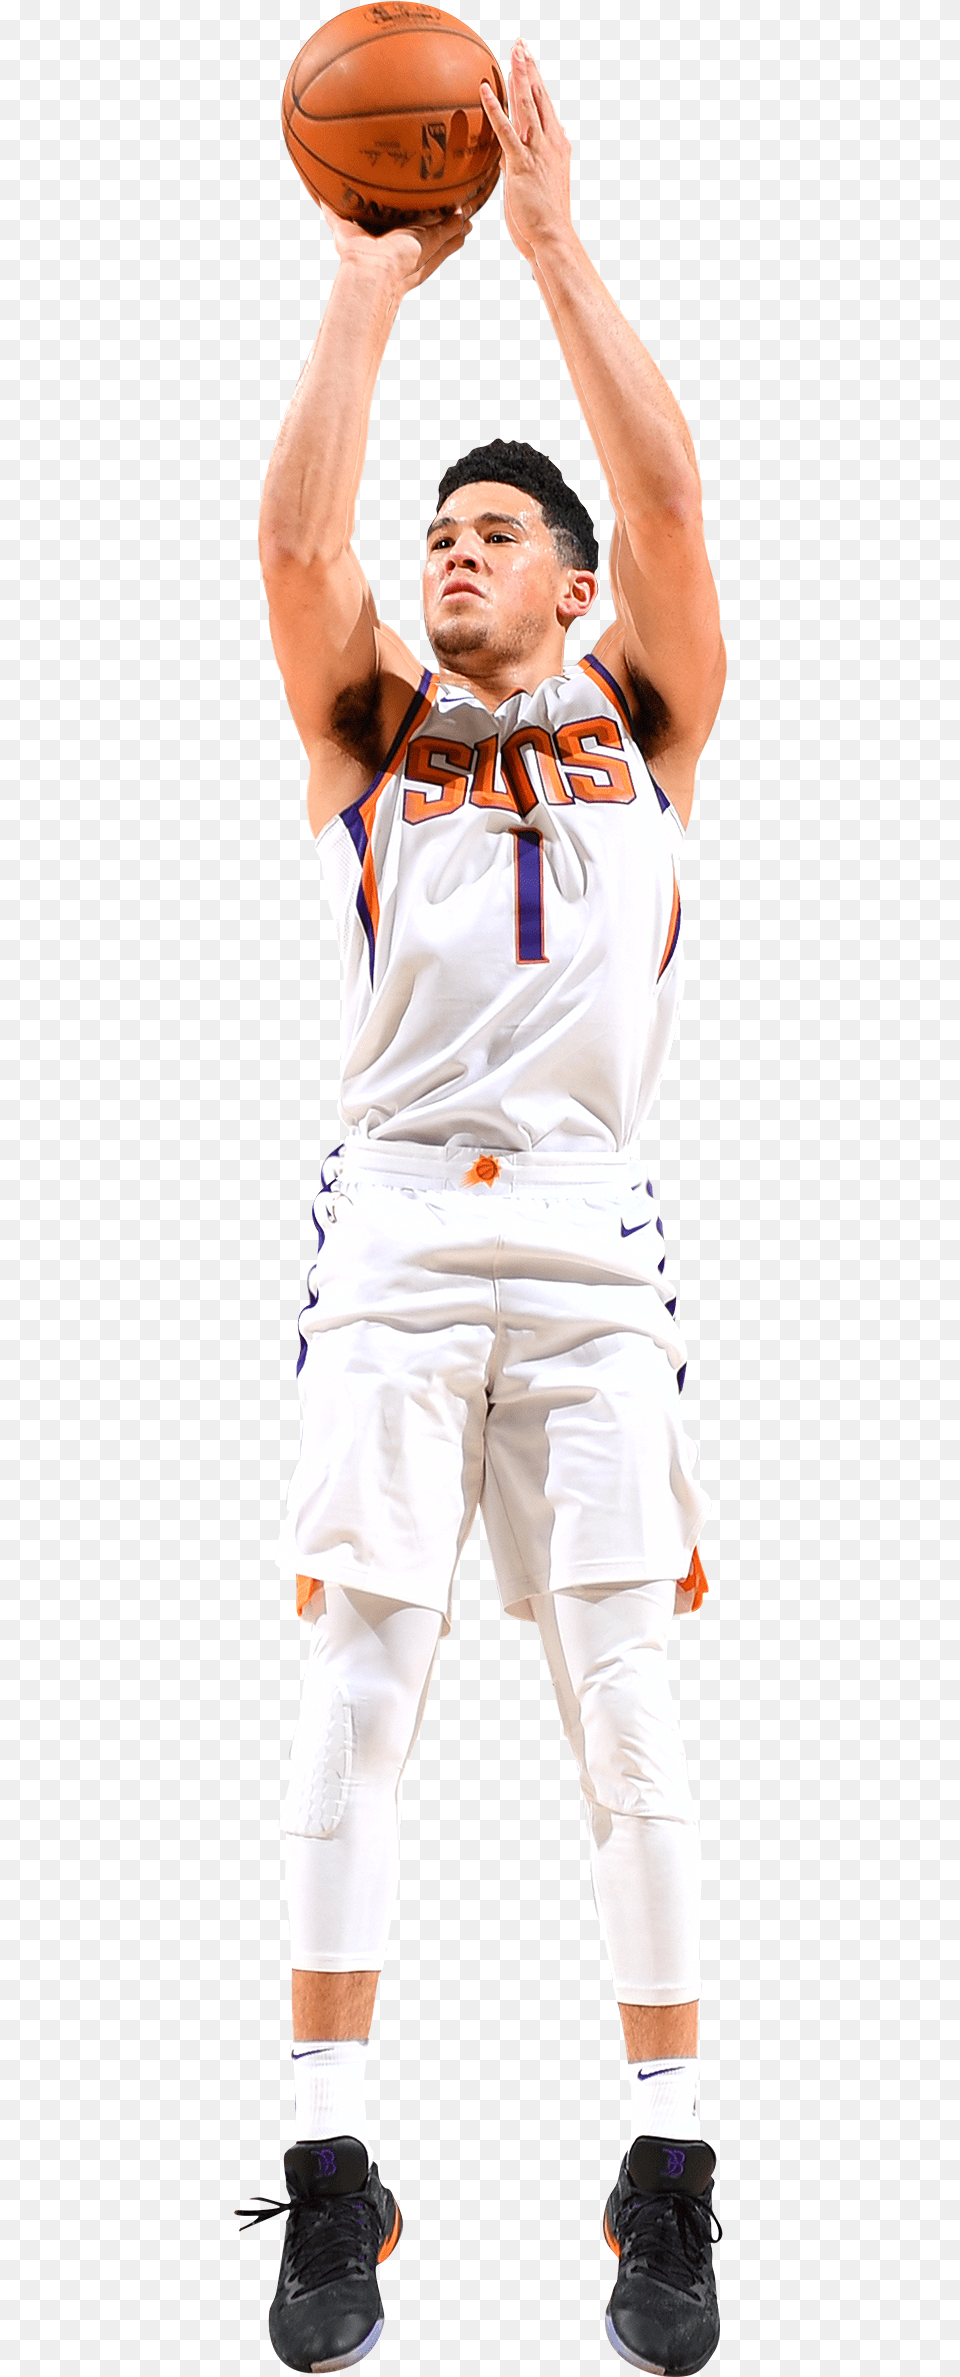 Search Nba Vote All Star Or Nba Vote Suns And Use College Softball, Hand, Shoe, Person, People Png Image